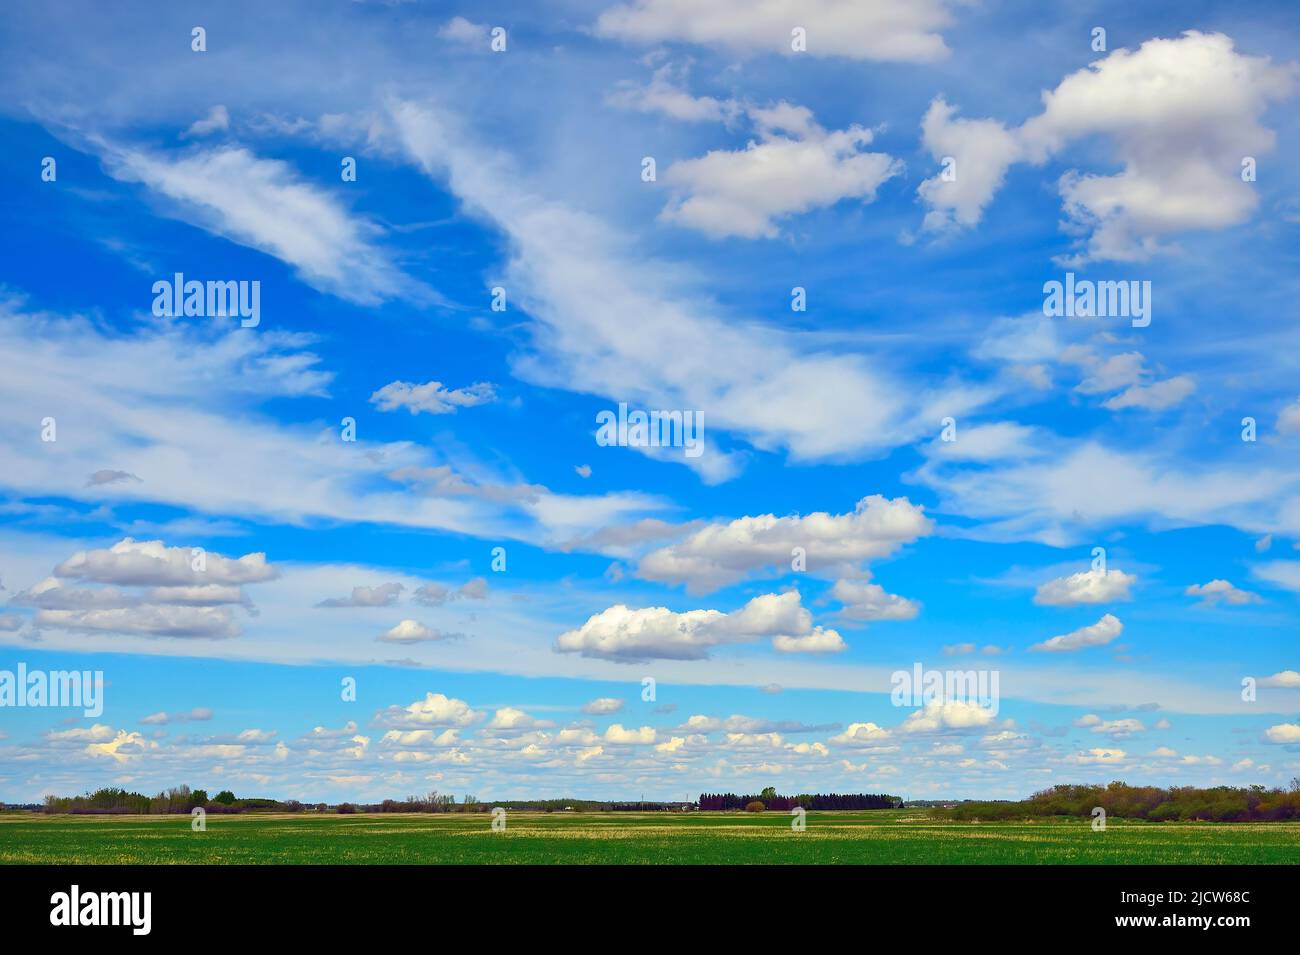 A beautiful sunny afternoon in rural Alberta Canada Stock Photo